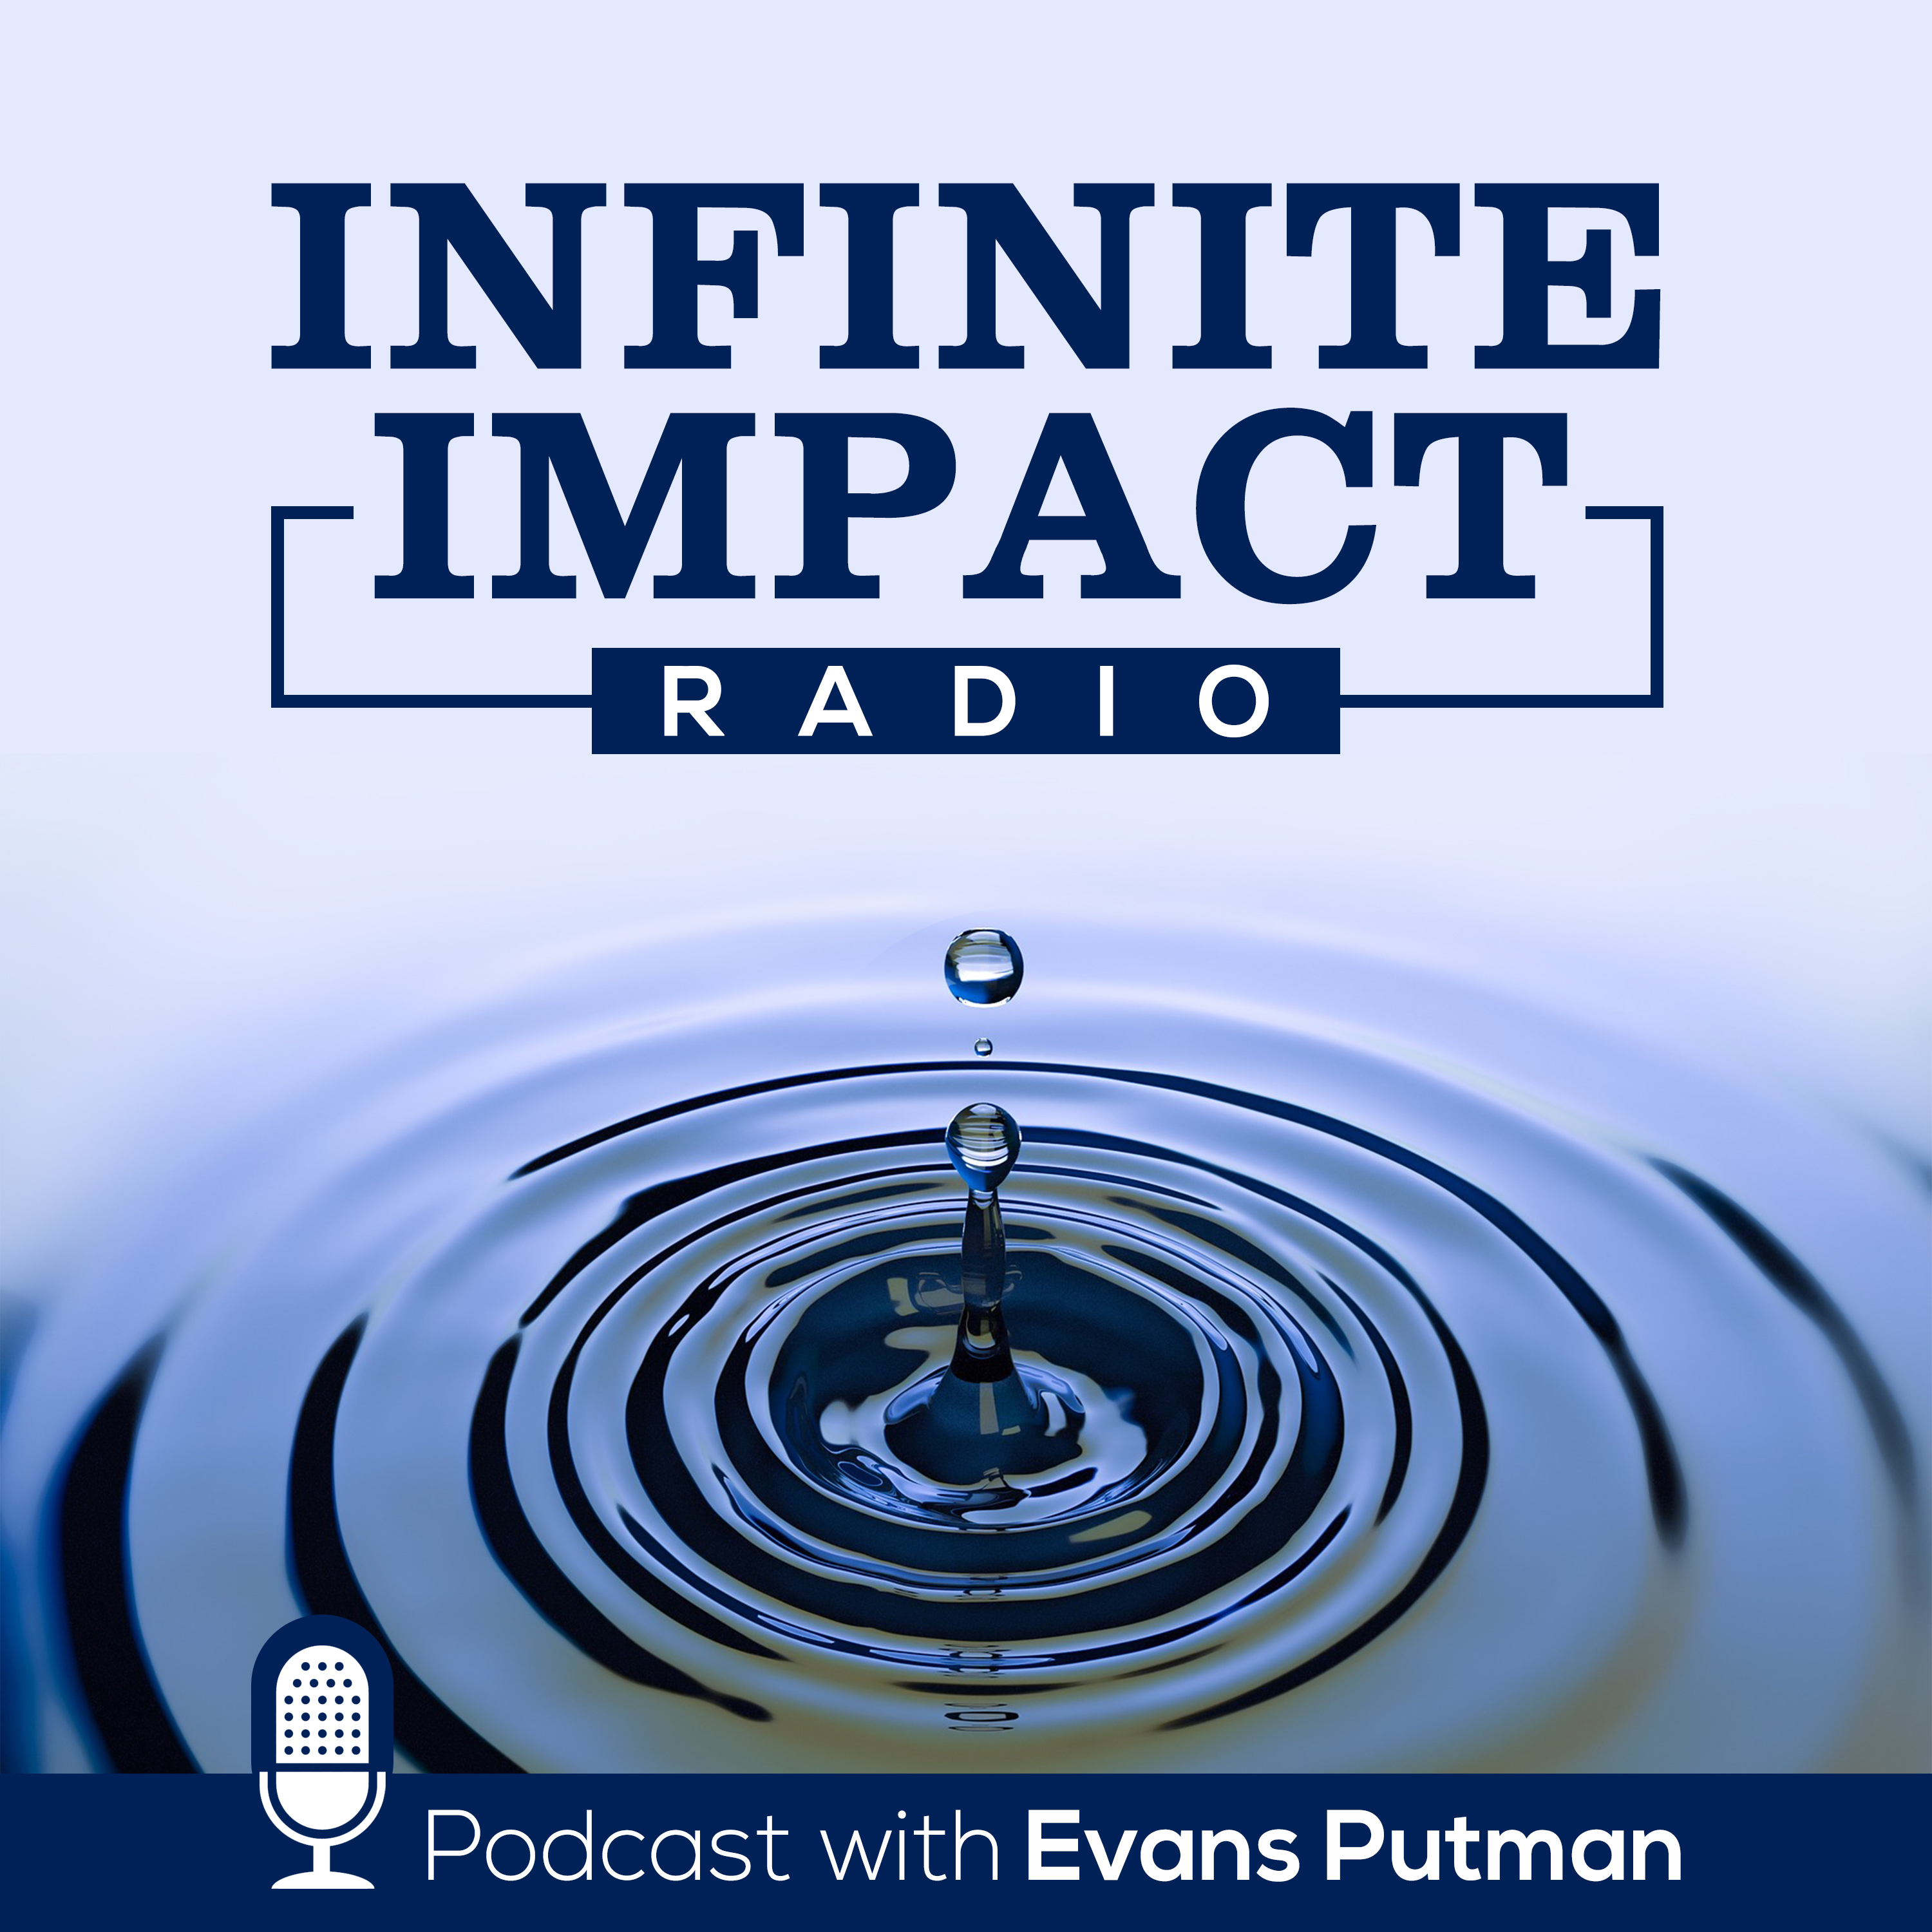 Artwork for podcast Infinite Impact Influencers